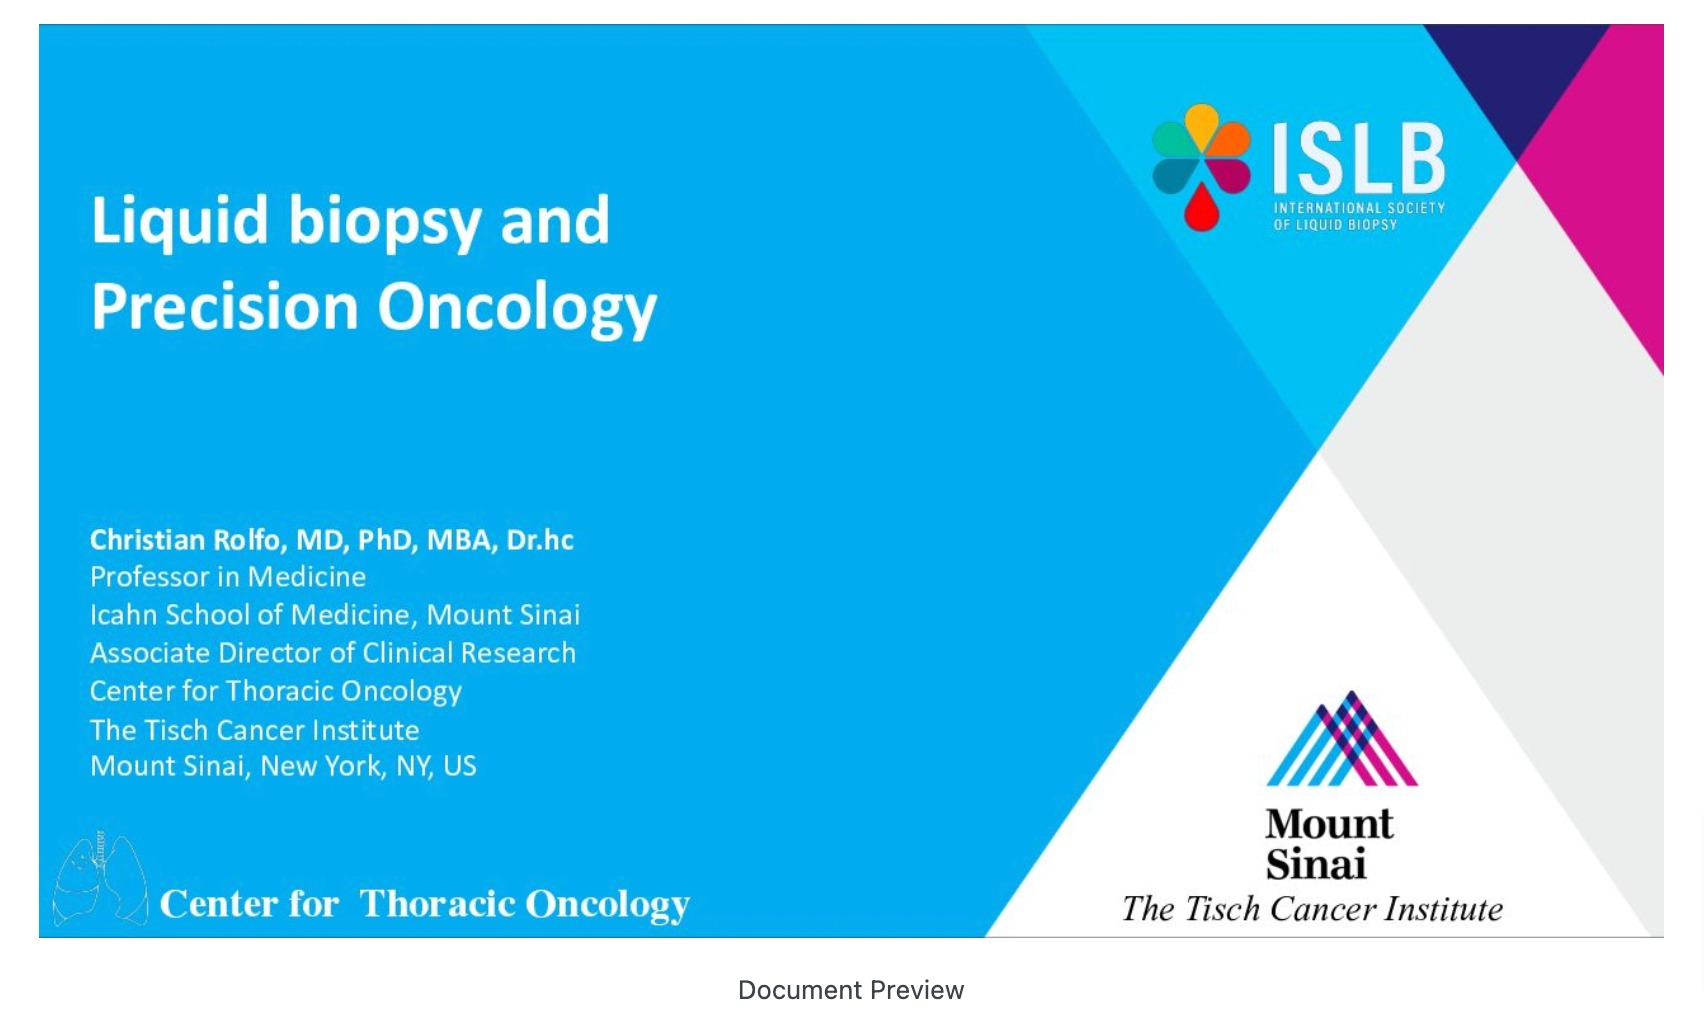 Liquid Biopsy and Precision Oncology